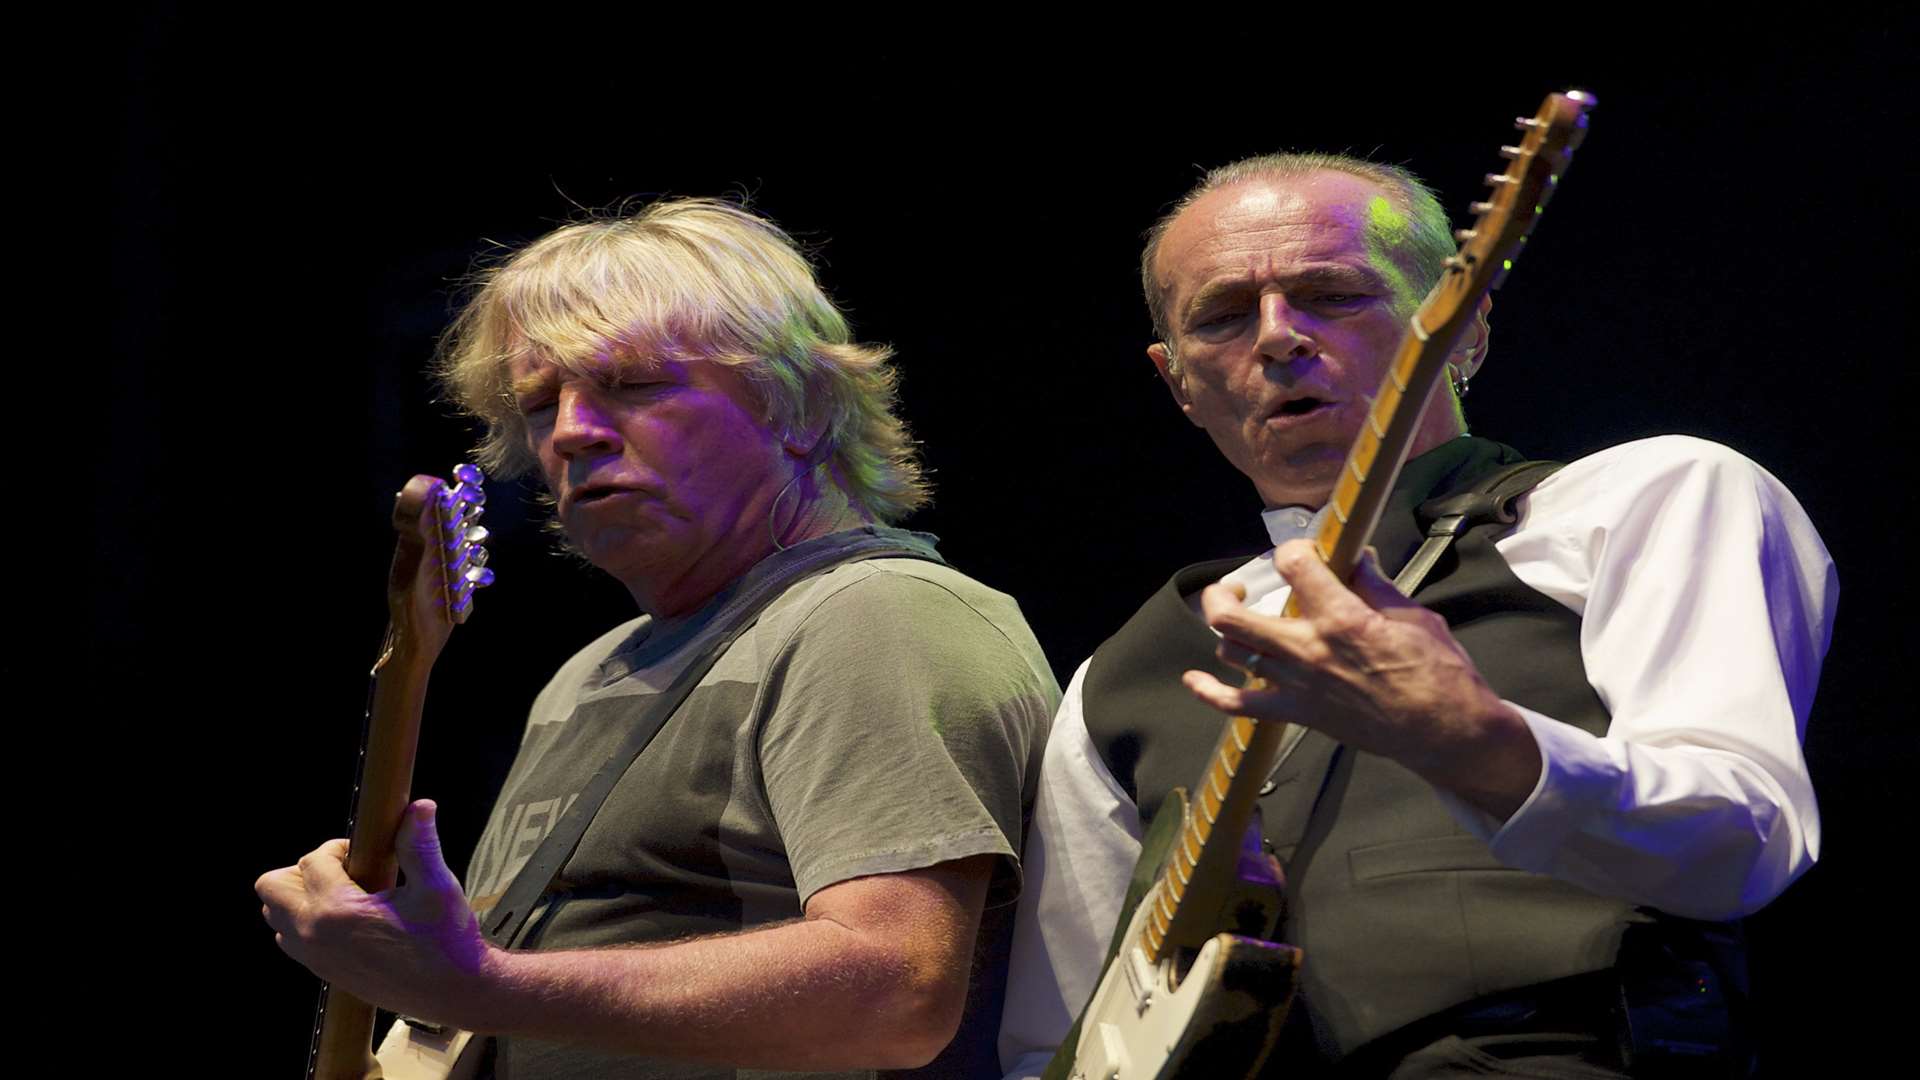 Rick Parfitt, left, and Francis Rossi. Status Quo play the first night at the Rochester Castle Concerts 2013